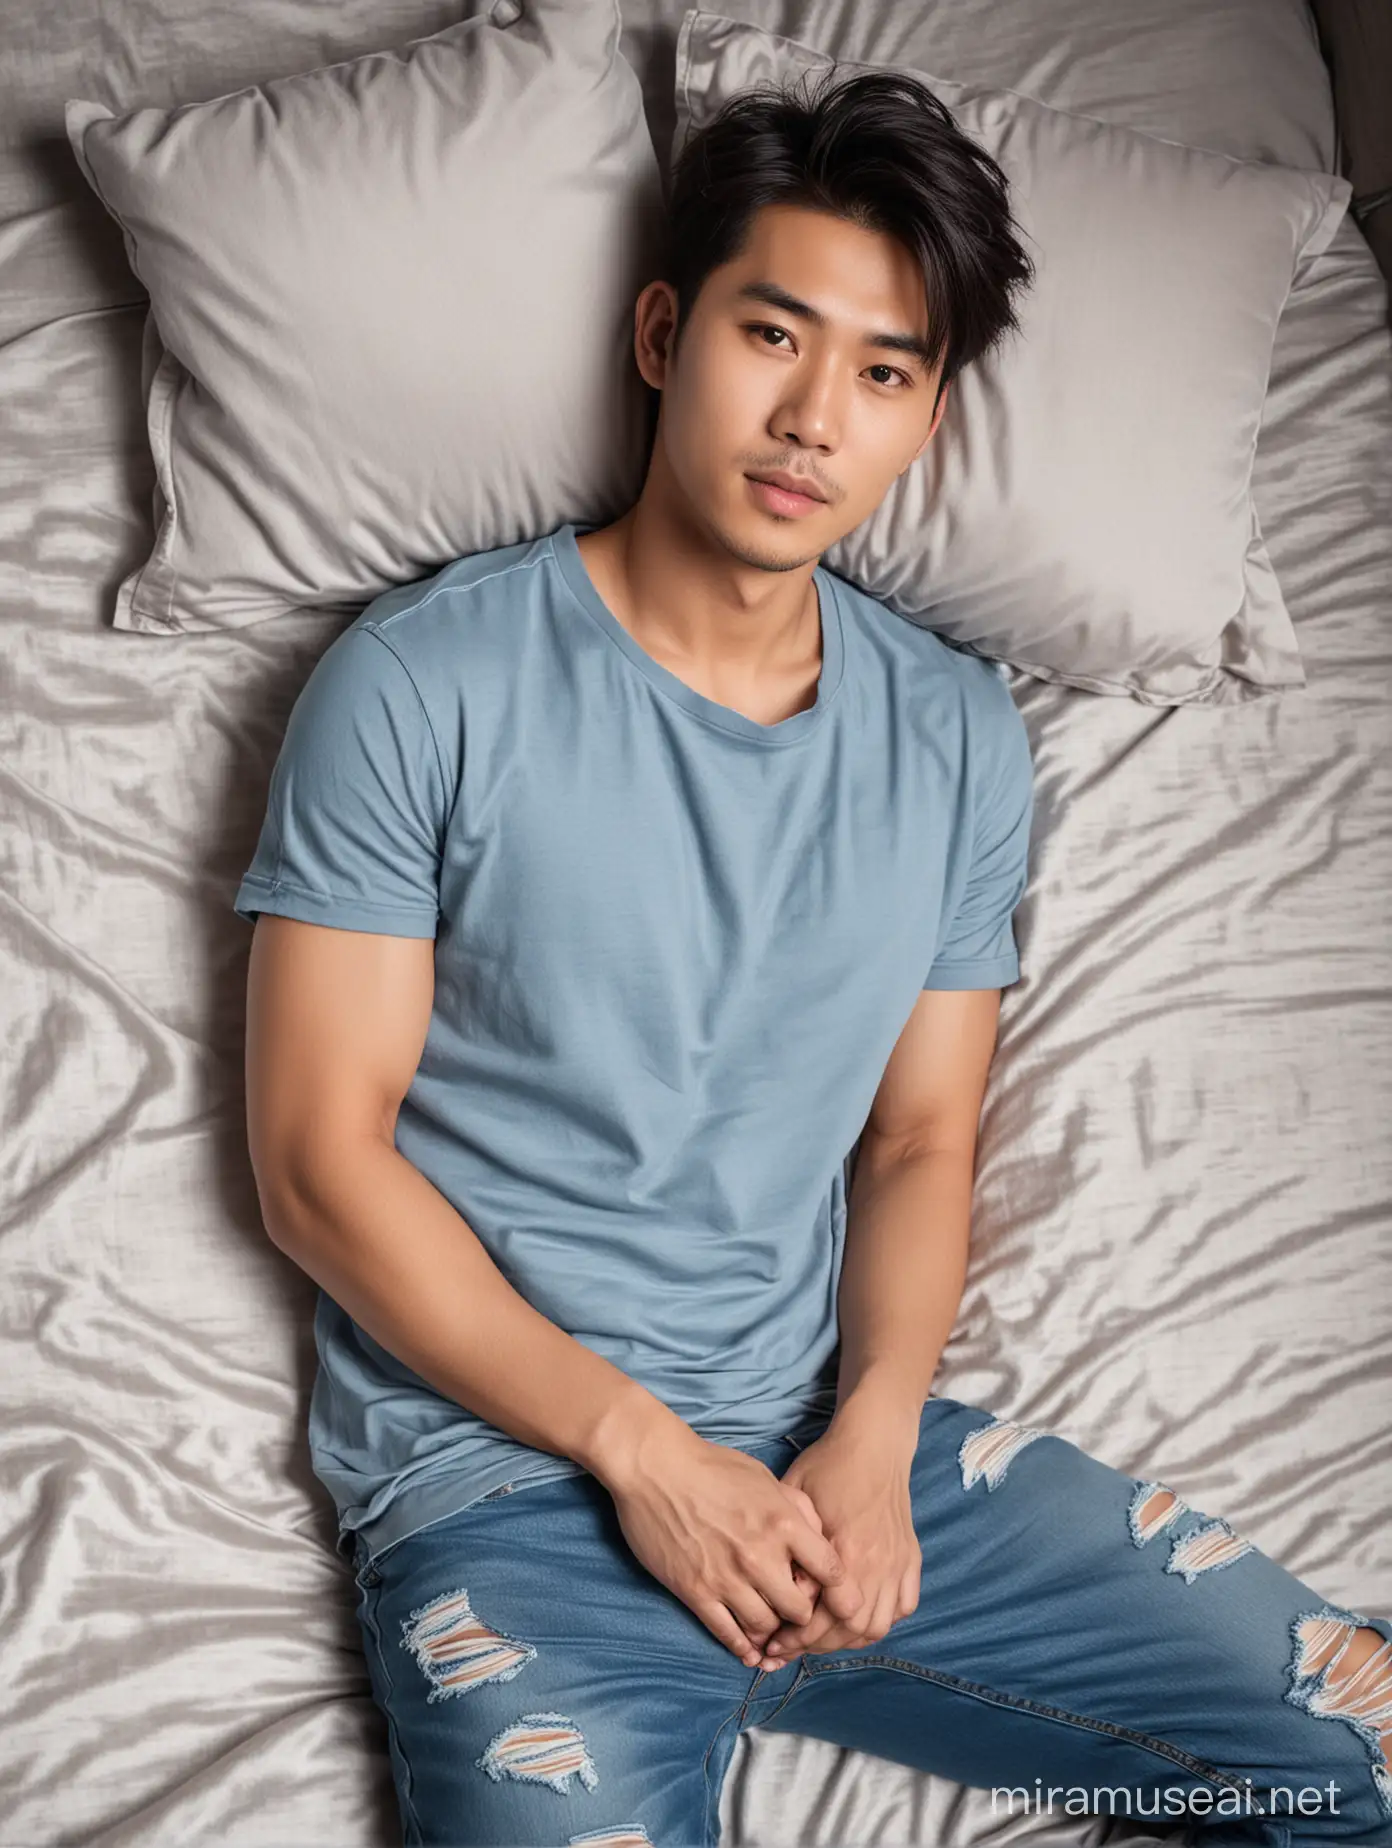 Handsome asian man with medium hair wearing blue grey tshirt and ripped jeans, lying on satin bed, very very seductive with full body view